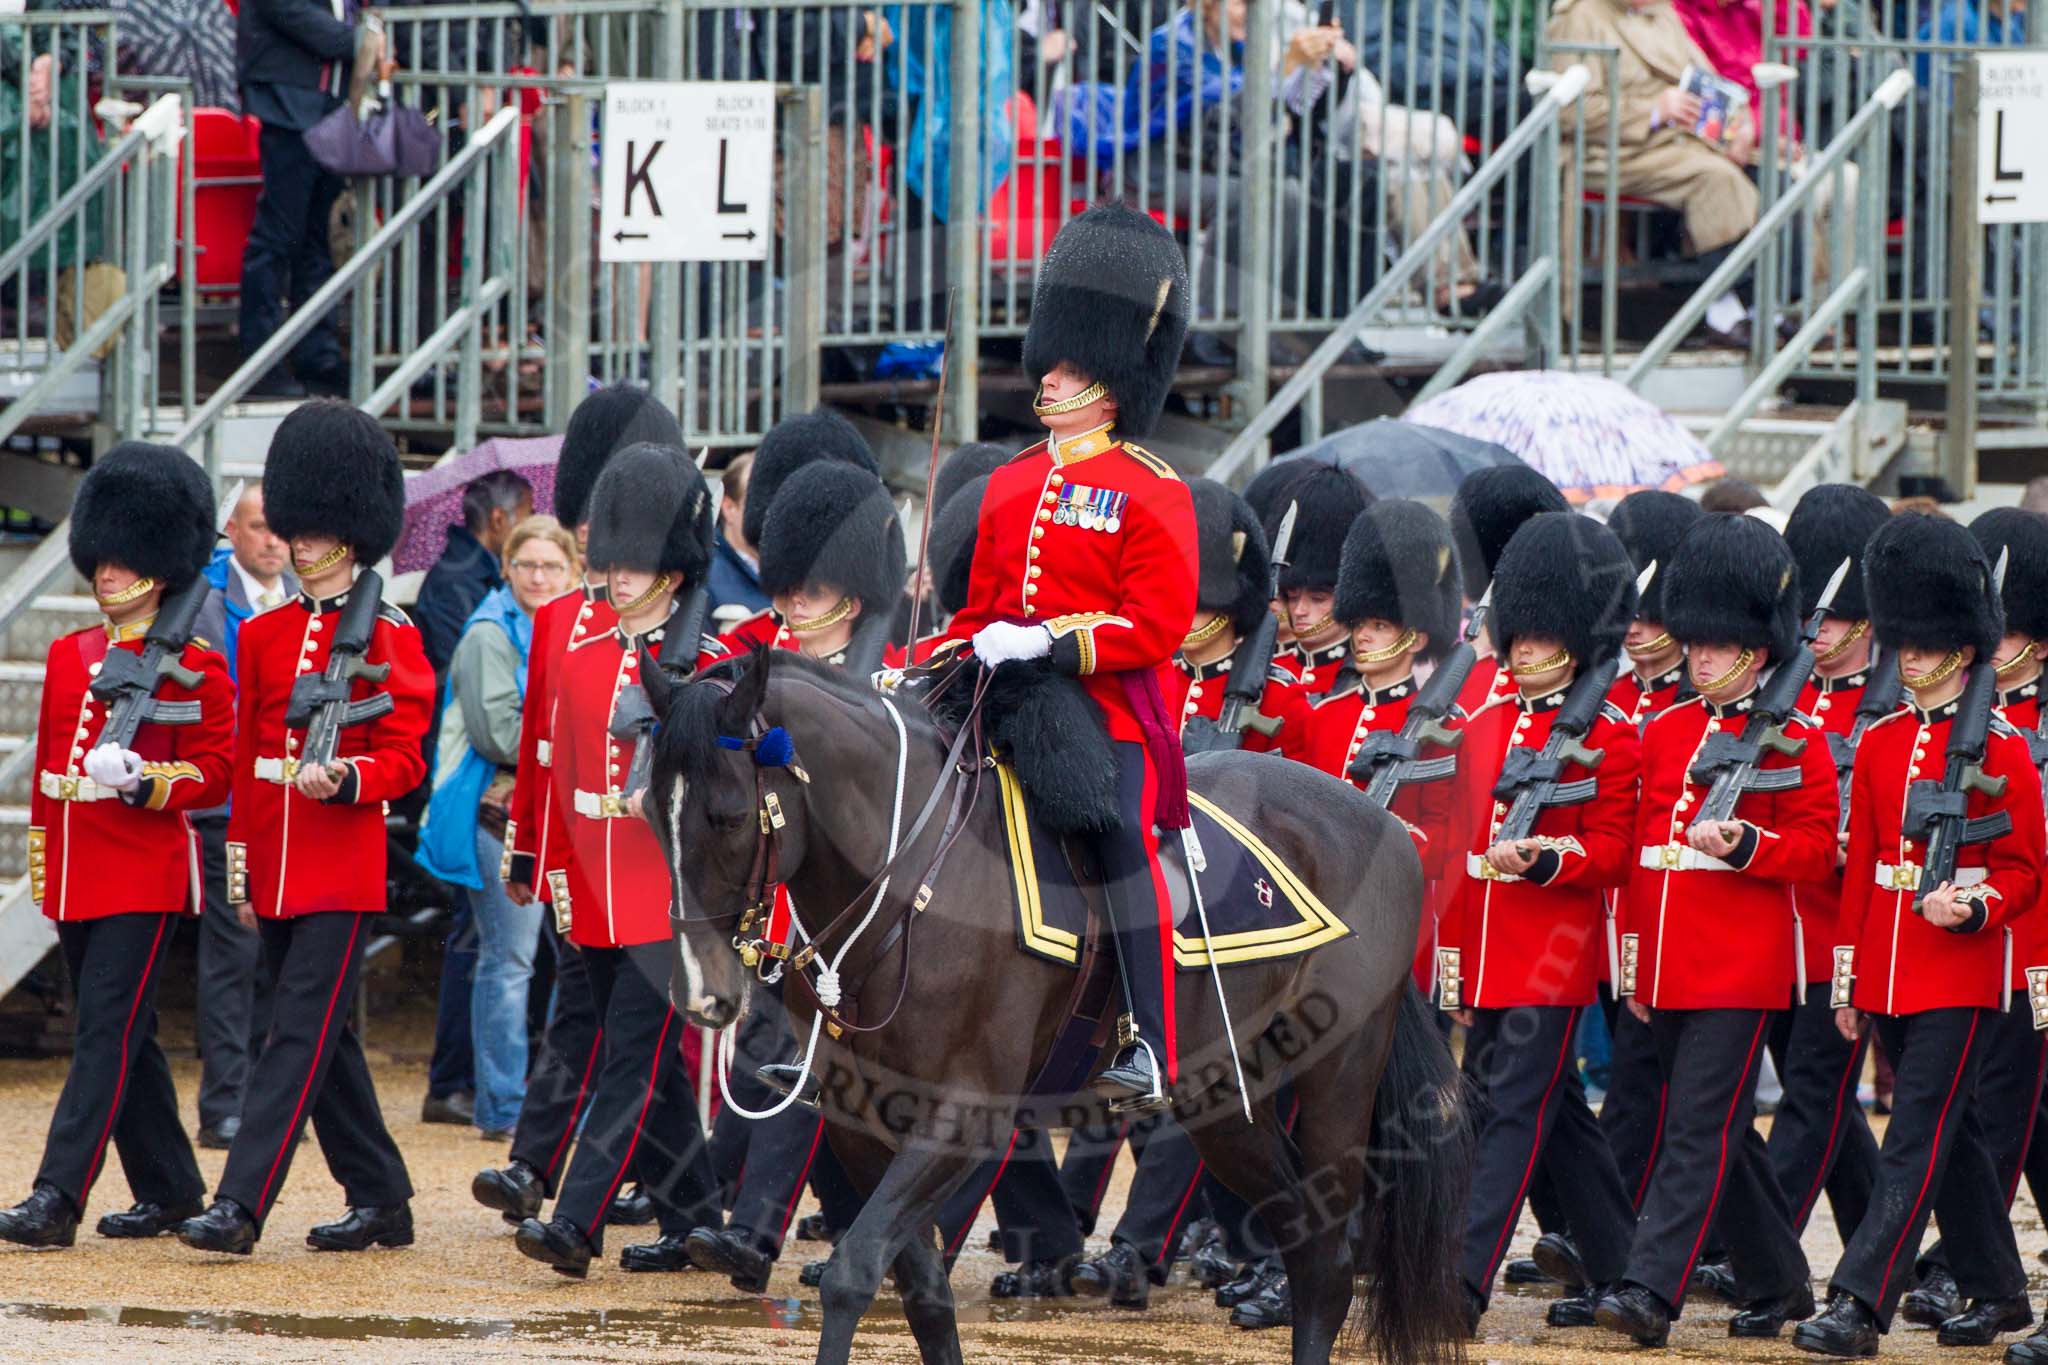 The Colonel's Review 2014.
Horse Guards Parade, Westminster,
London,

United Kingdom,
on 07 June 2014 at 11:32, image #471